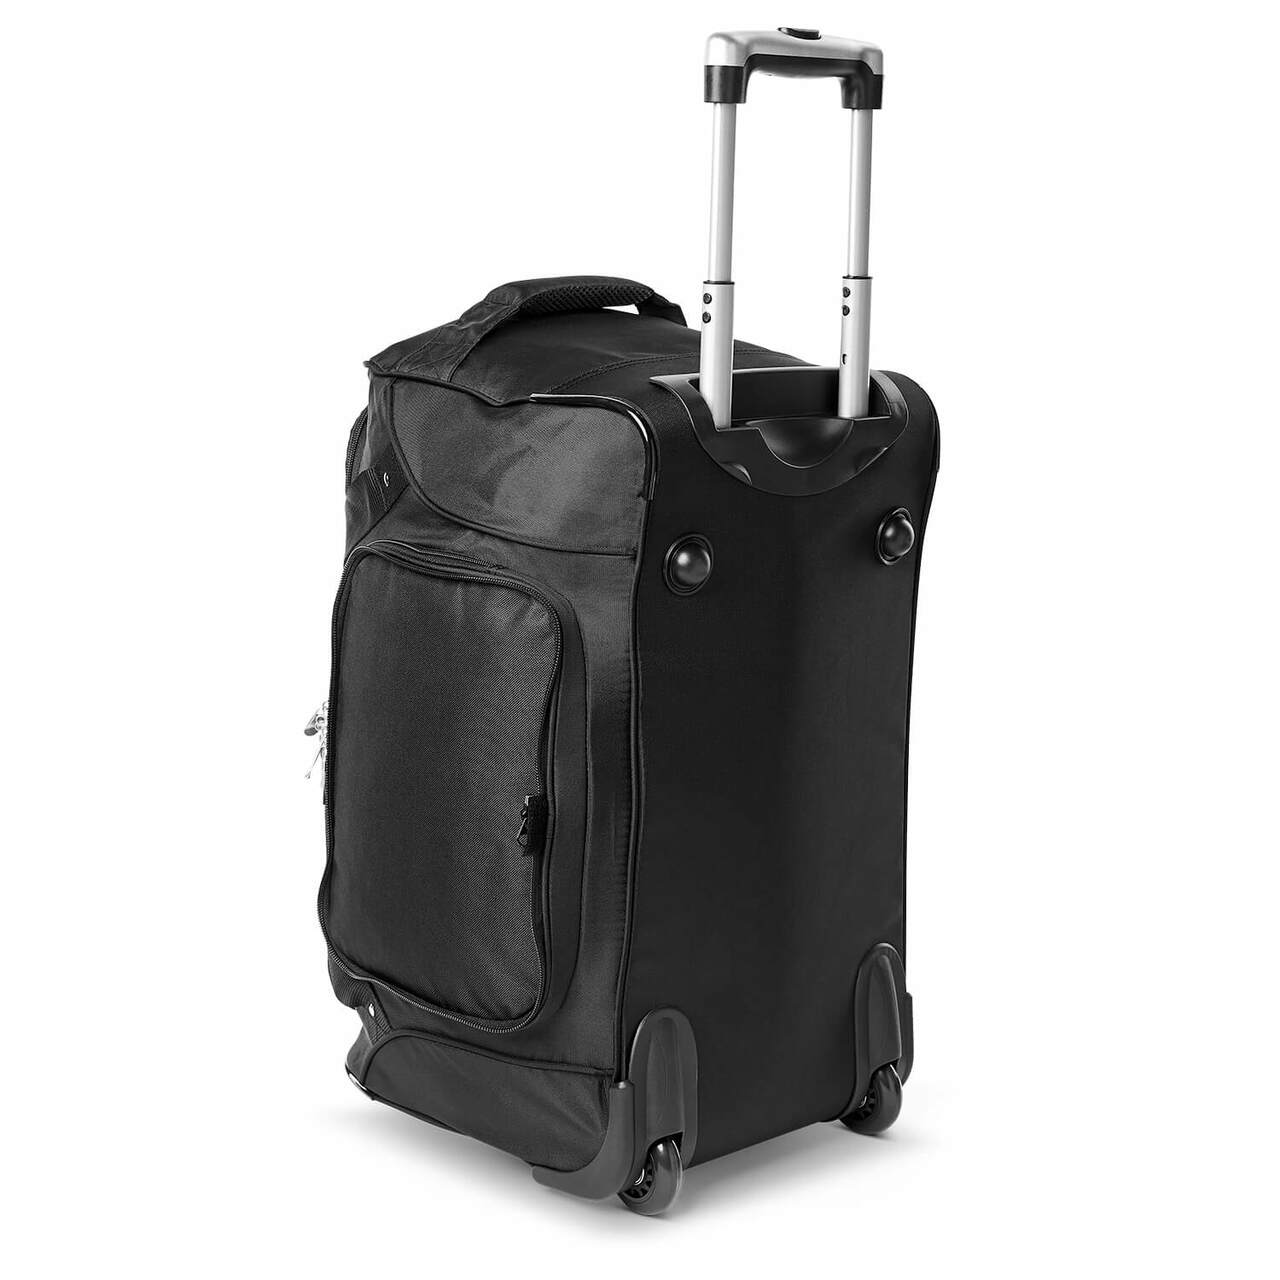 Memphis Grizzlies Luggage | Memphis Grizzlies Wheeled Carry On Luggage